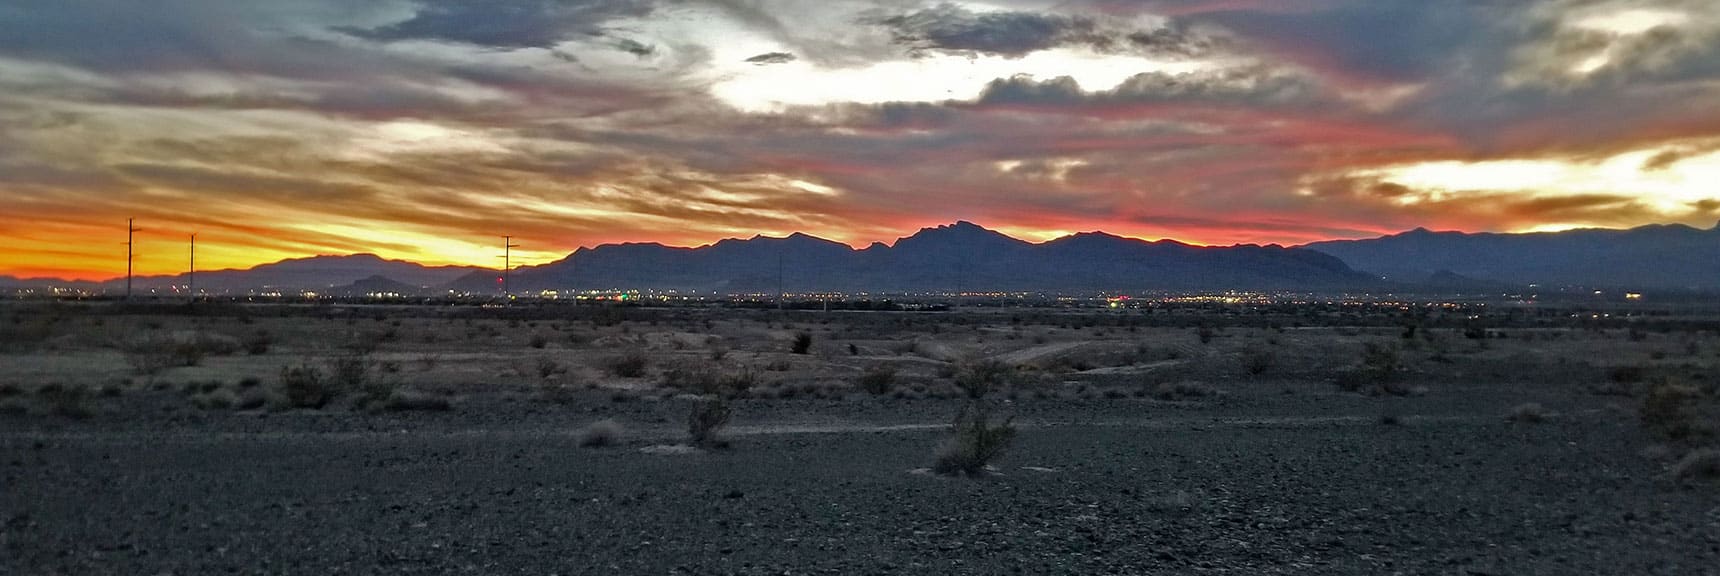 Sun Disappearing. Las Vegas Lighting Up. Final Mile Will Be in the Dark Guided Only by City Lights. | Gass Peak Grand Crossing | Desert National Wildlife Refuge to Centennial Hills Las Vegas via Gass Peak Summit by Foot